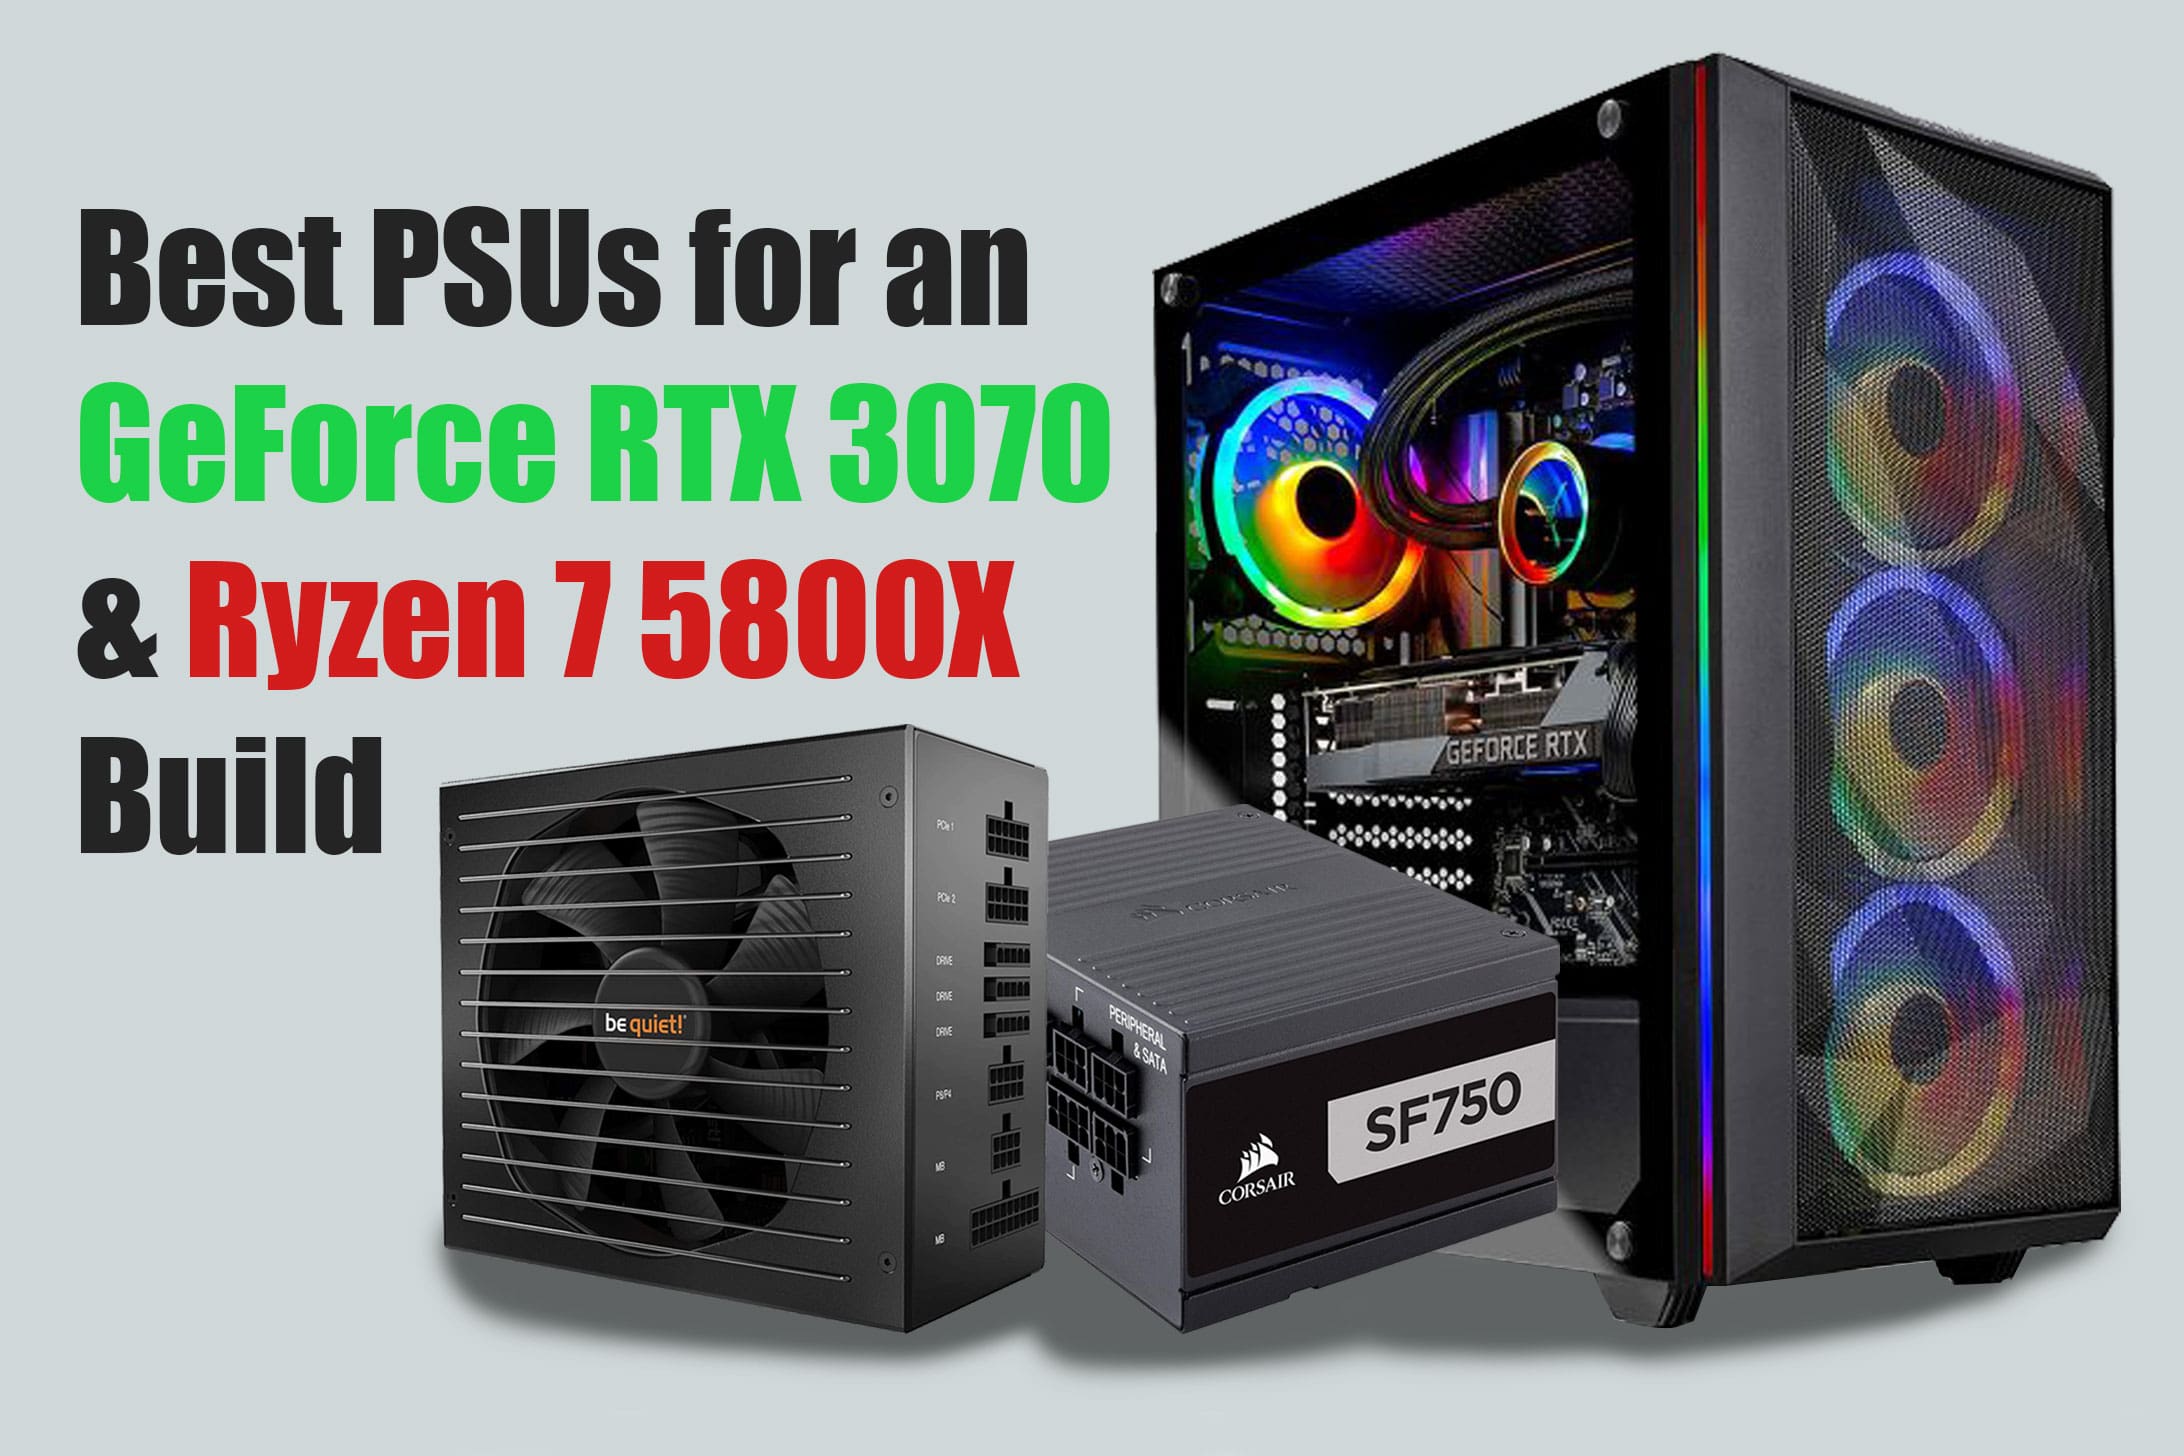 Best PSUs for an Nvidia GeForce RTX 3070 and AMD Ryzen 7 5800X Build